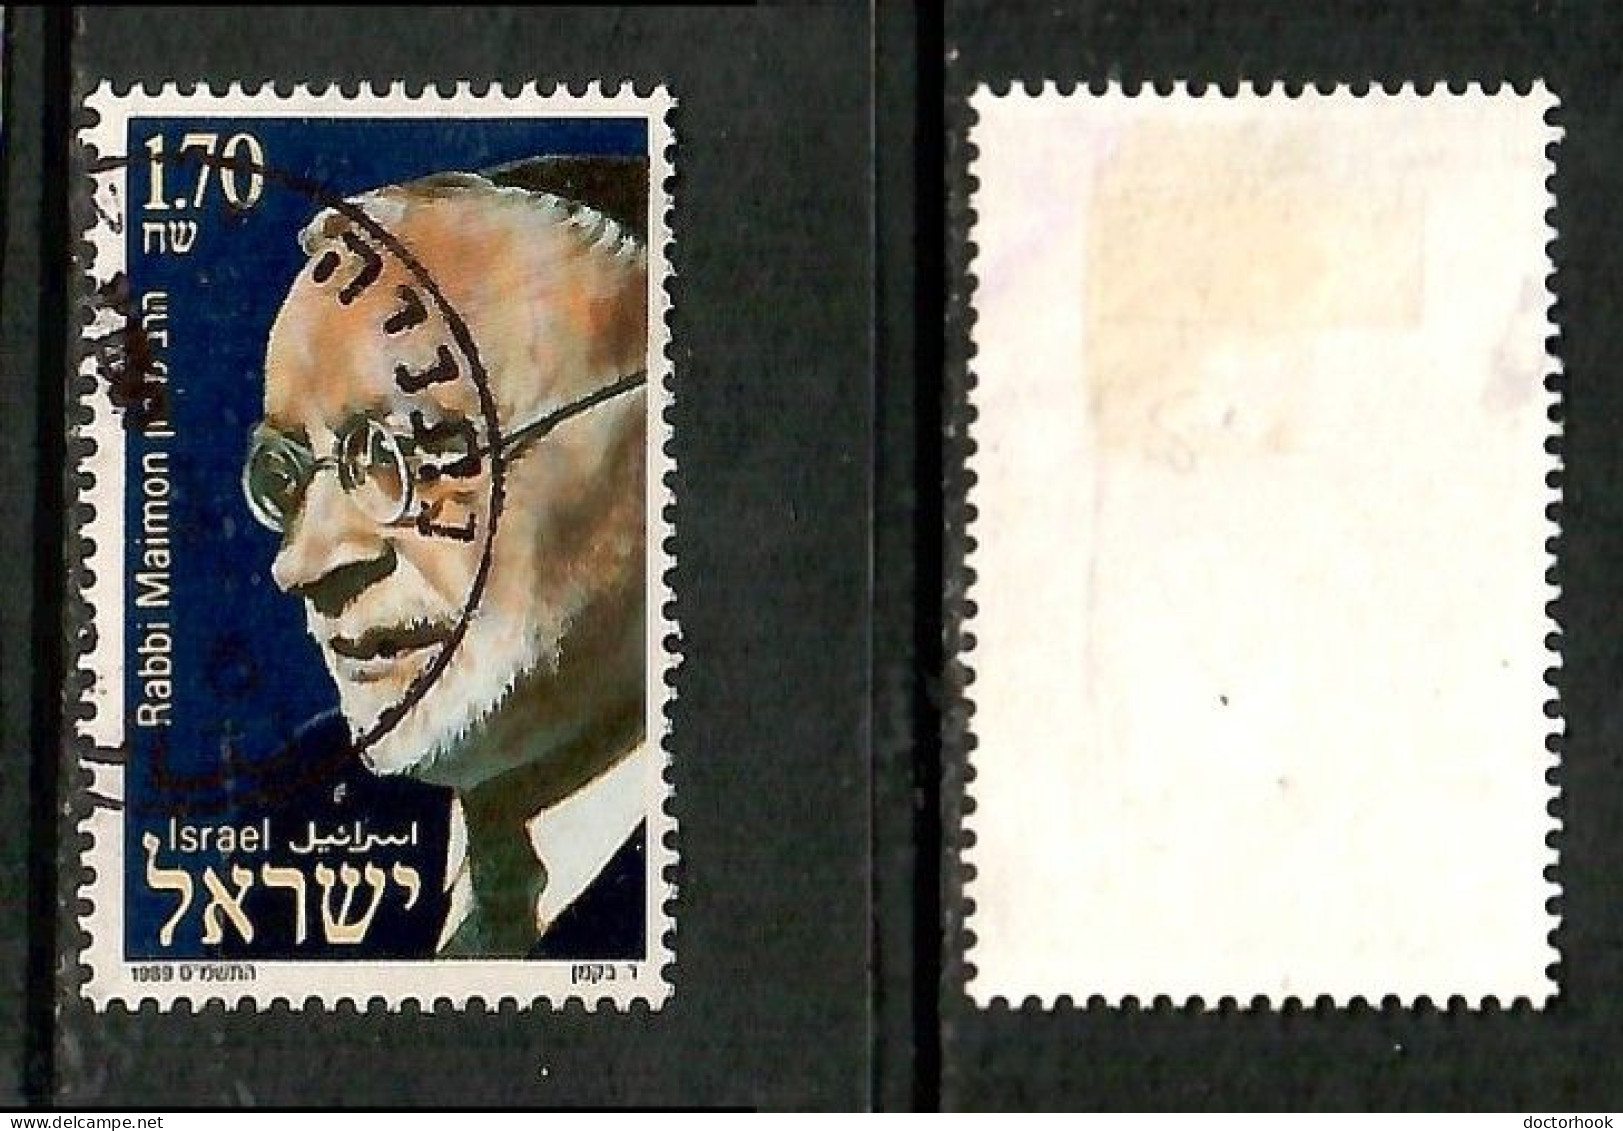 ISRAEL   Scott # 1011 USED (CONDITION PER SCAN) (Stamp Scan # 1026-13) - Usati (senza Tab)